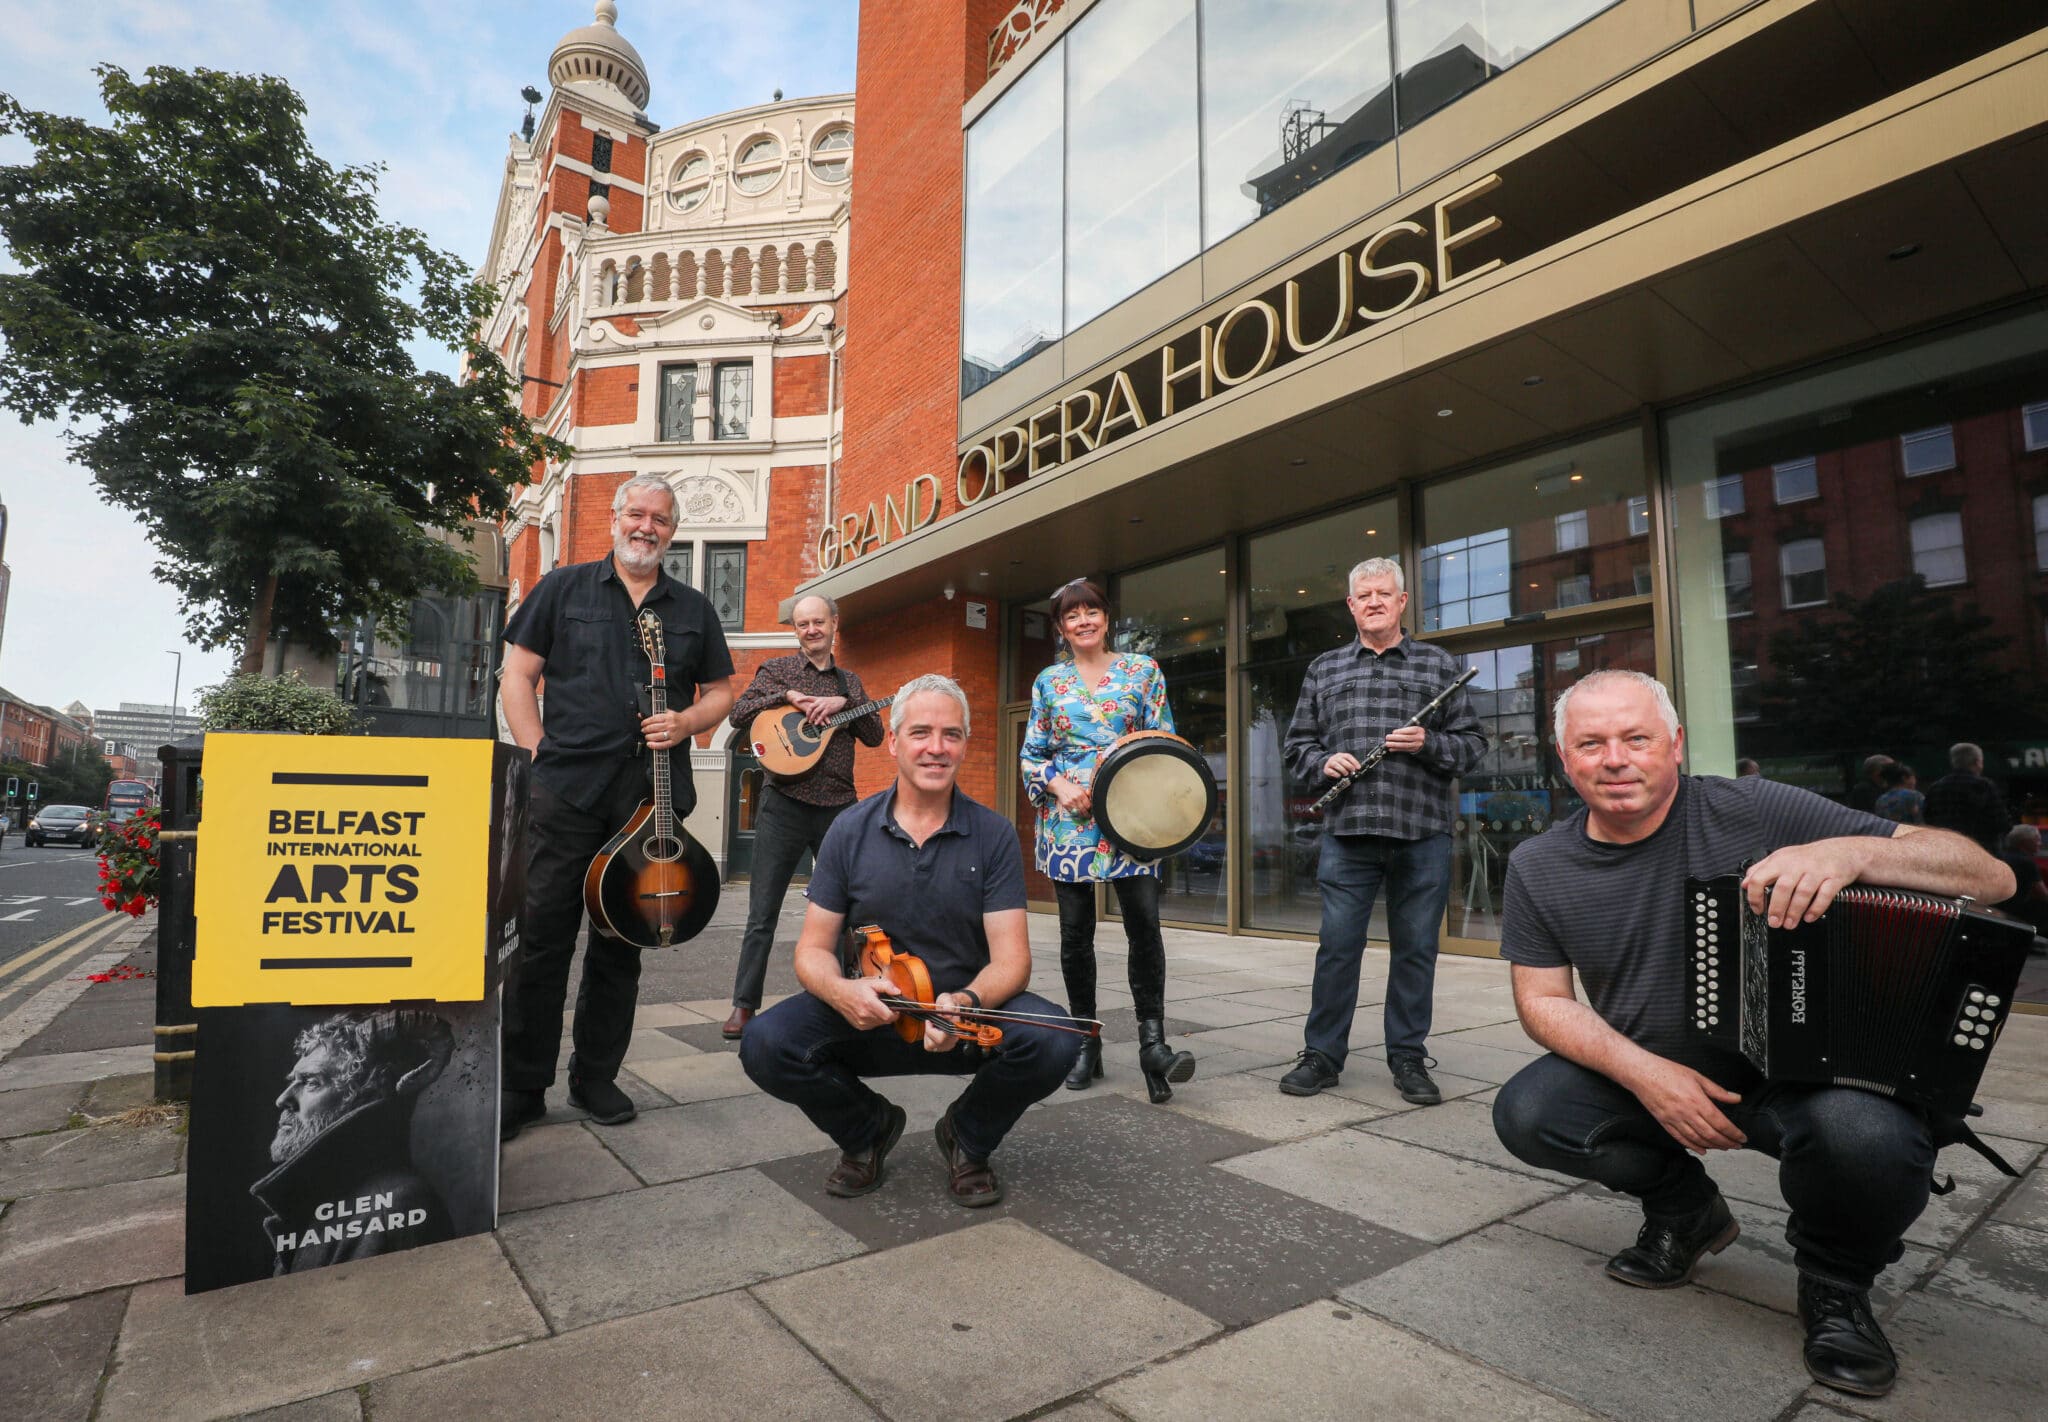 Dervish launch Belfast International Arts Festival 2021 programme. Members of the folk band are posing with their musical instruments outside Grand Opera House, Belfast.